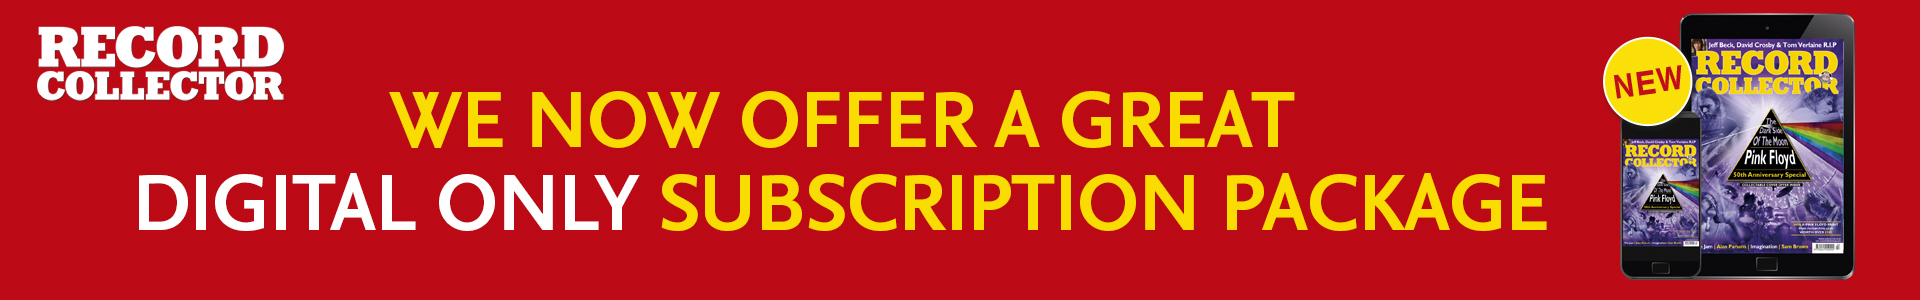 Digital Subscription Packages